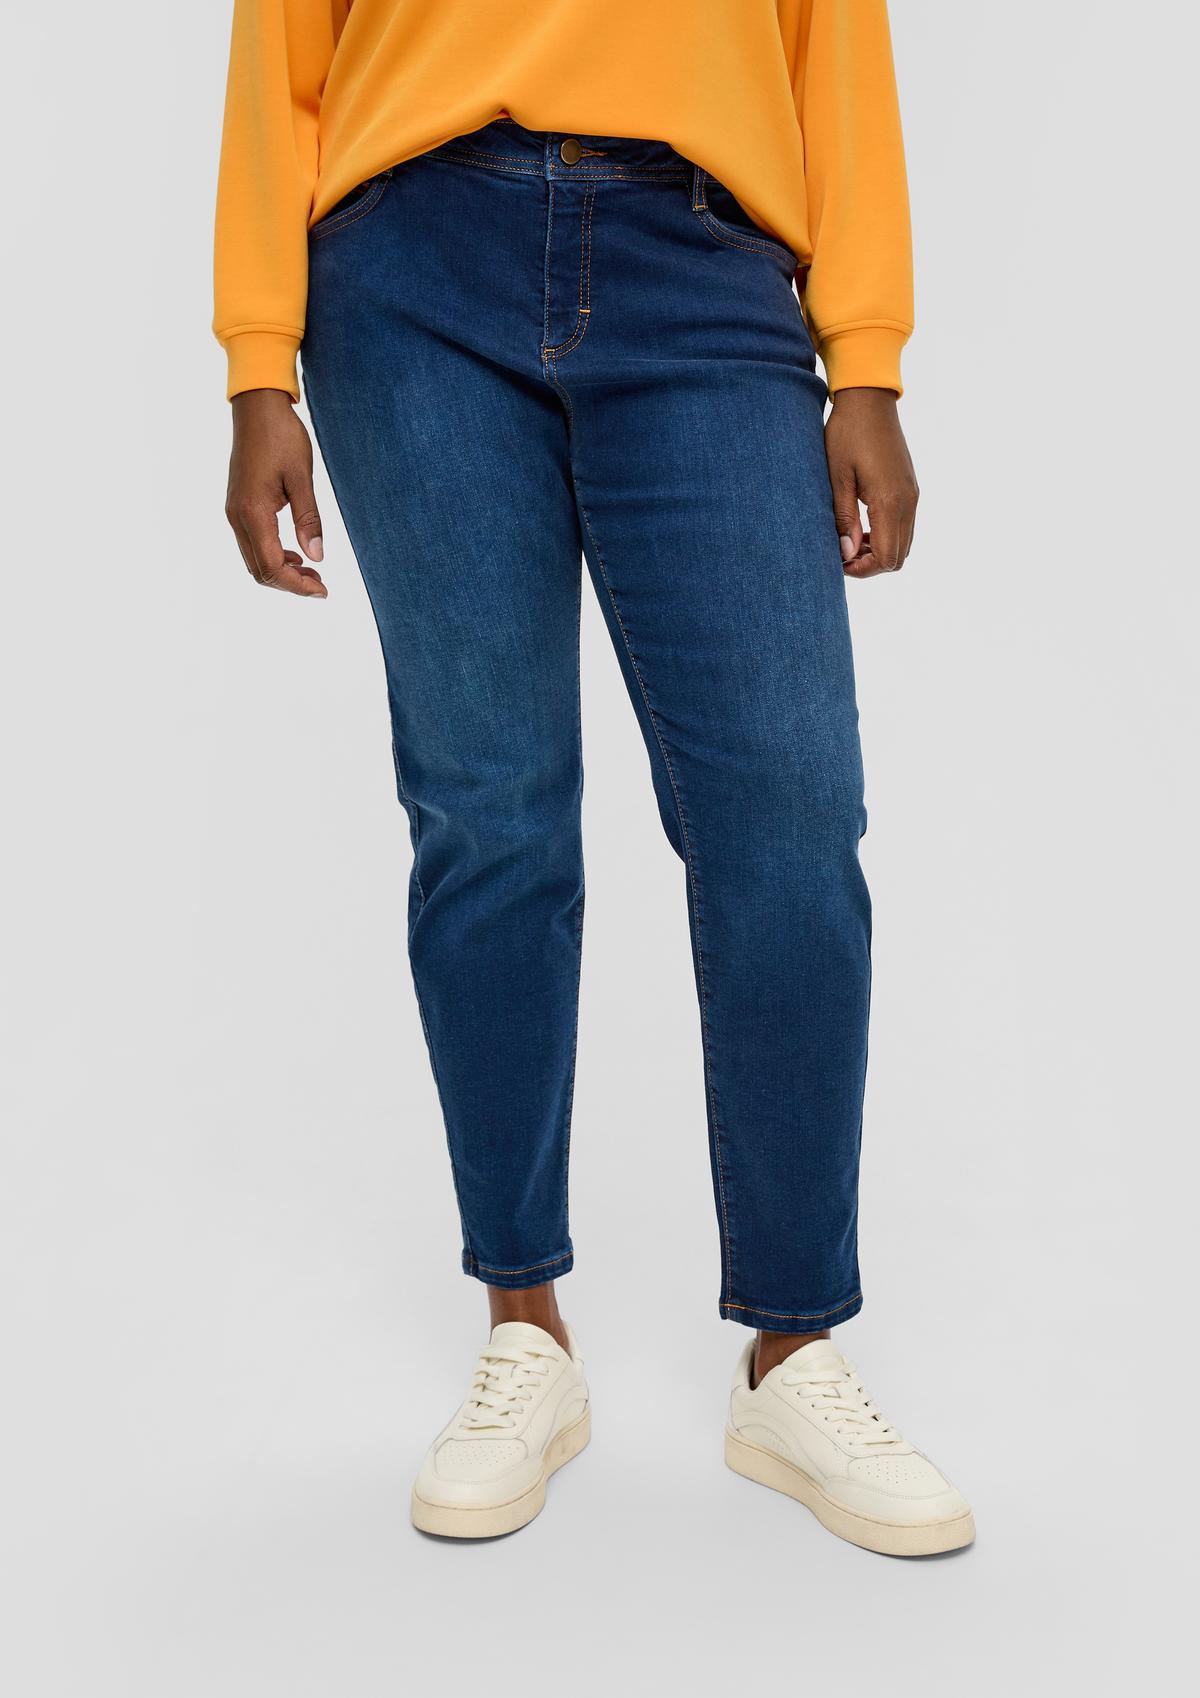 s.Oliver Jeans / relaxed fit / mid rise / slim leg